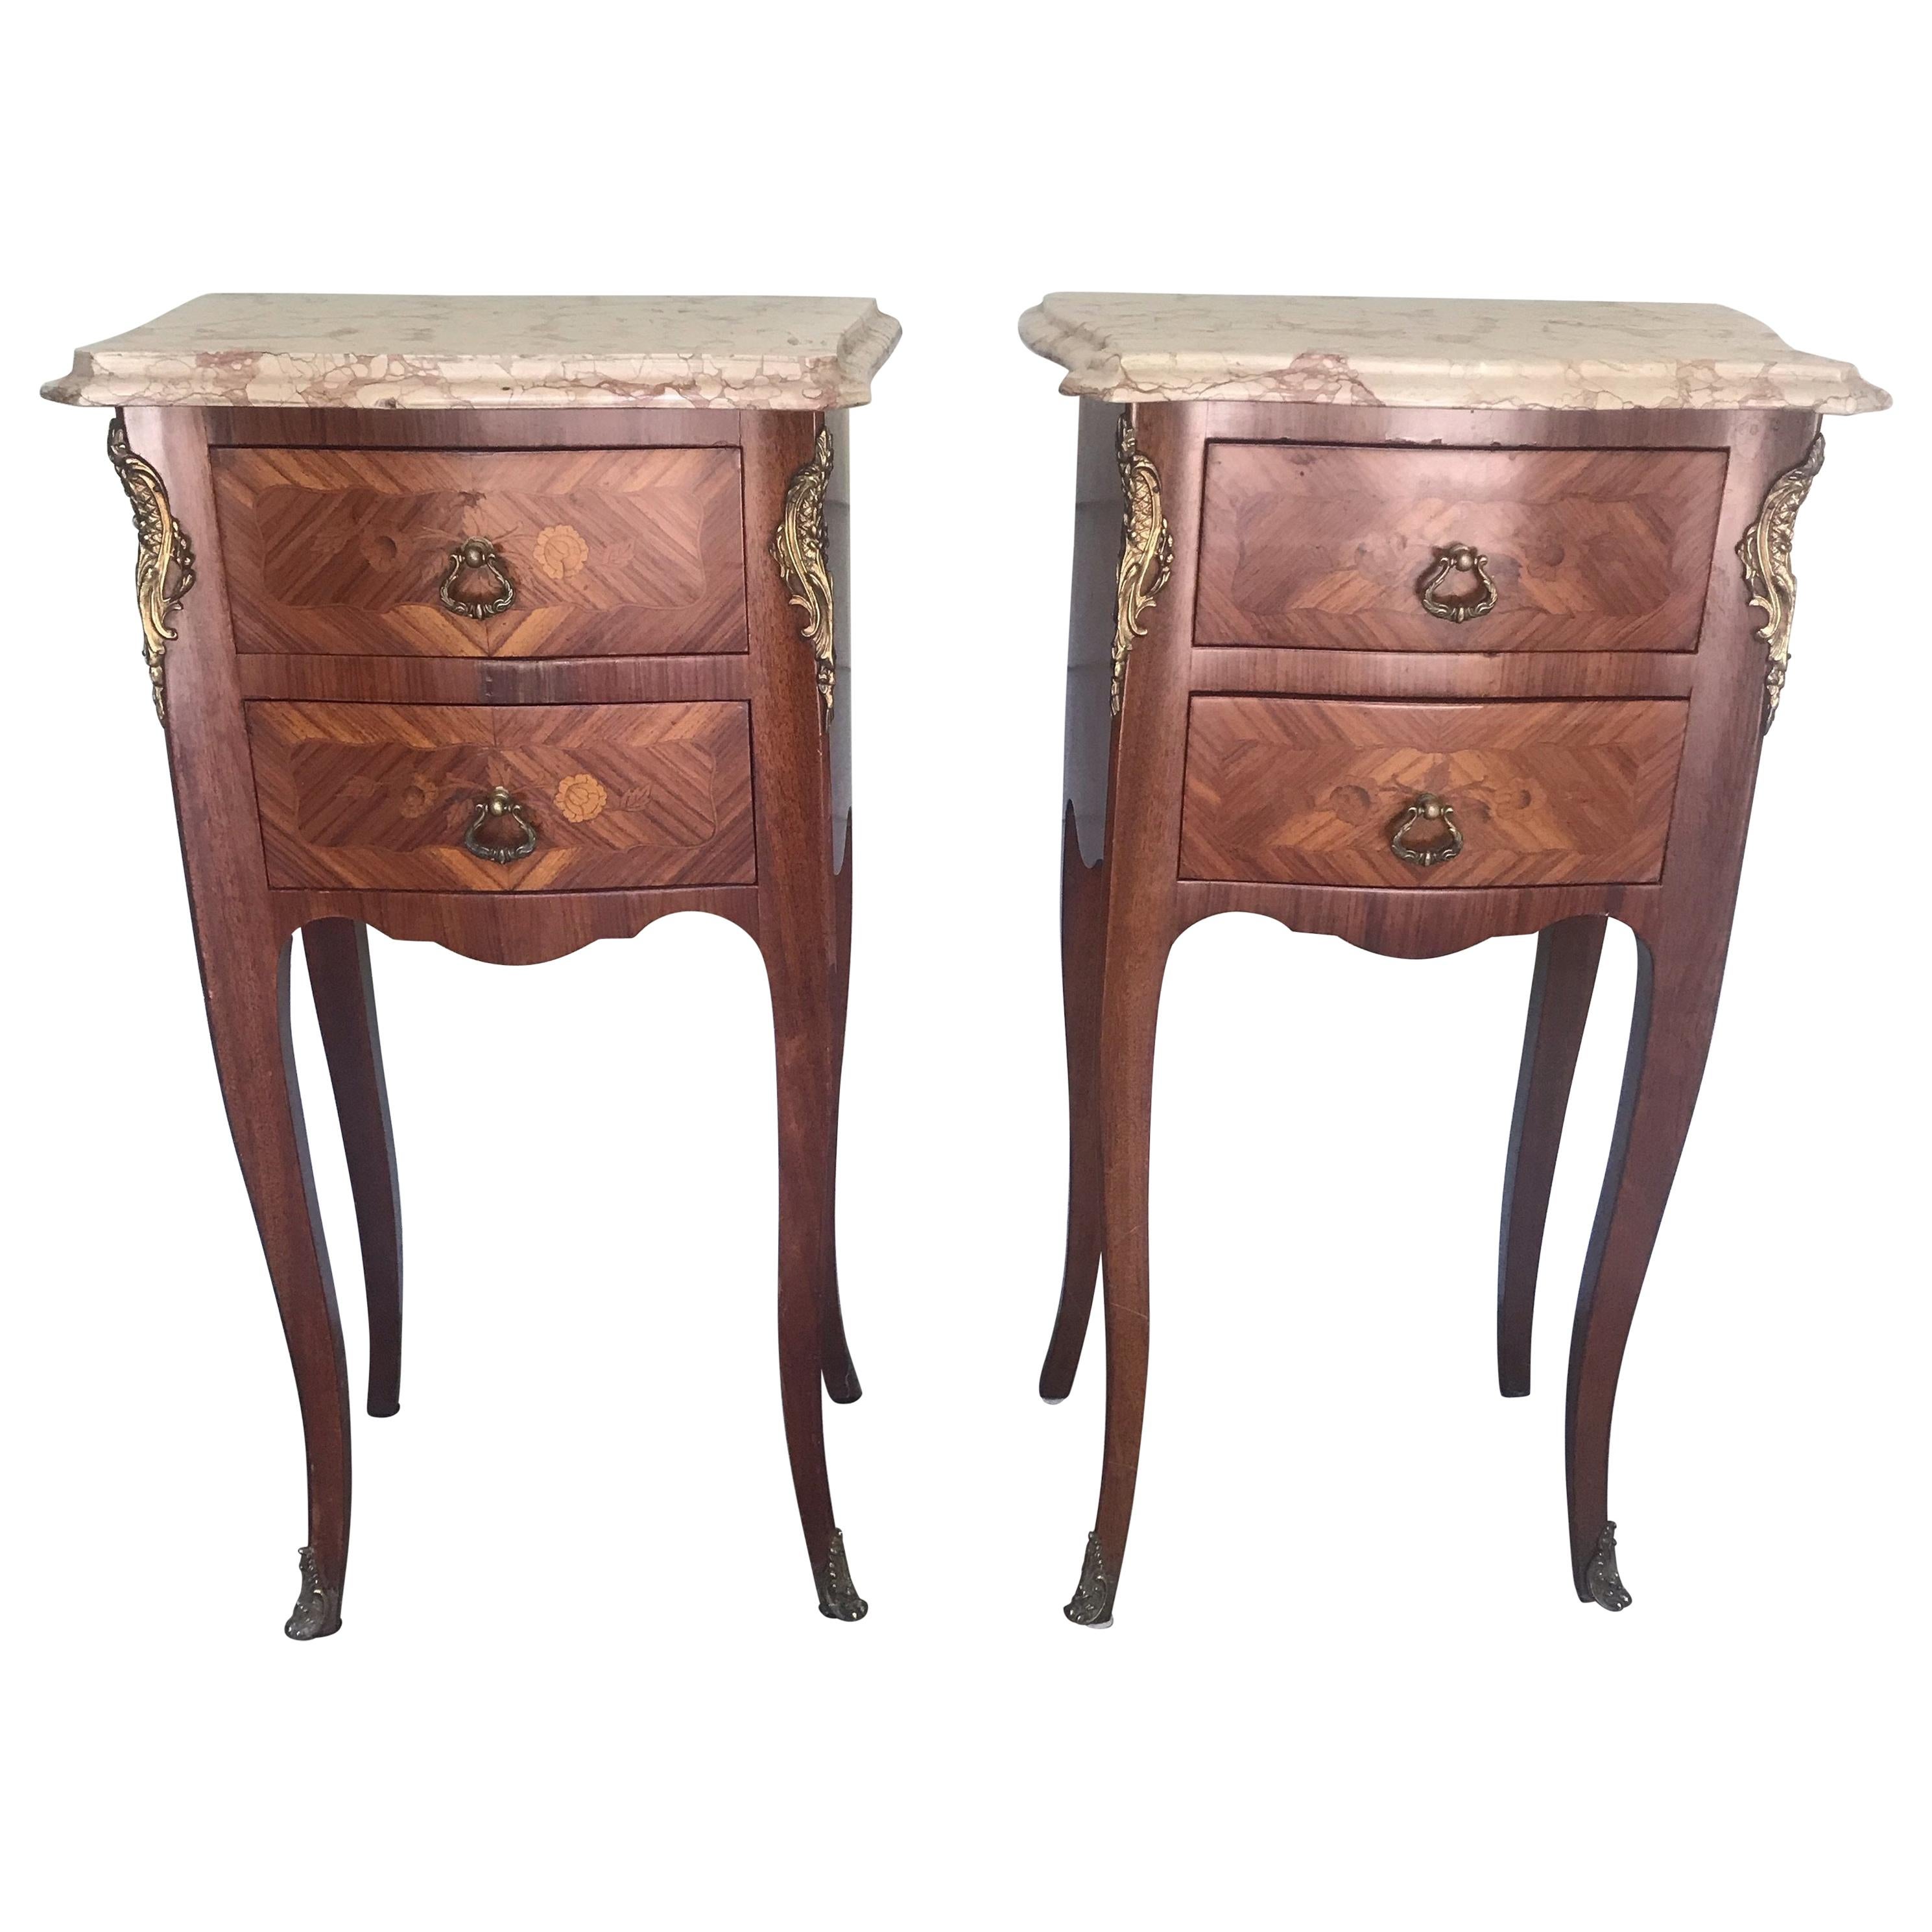 Pair of French Antique Marble-Top Nightstands or Bedside Tables